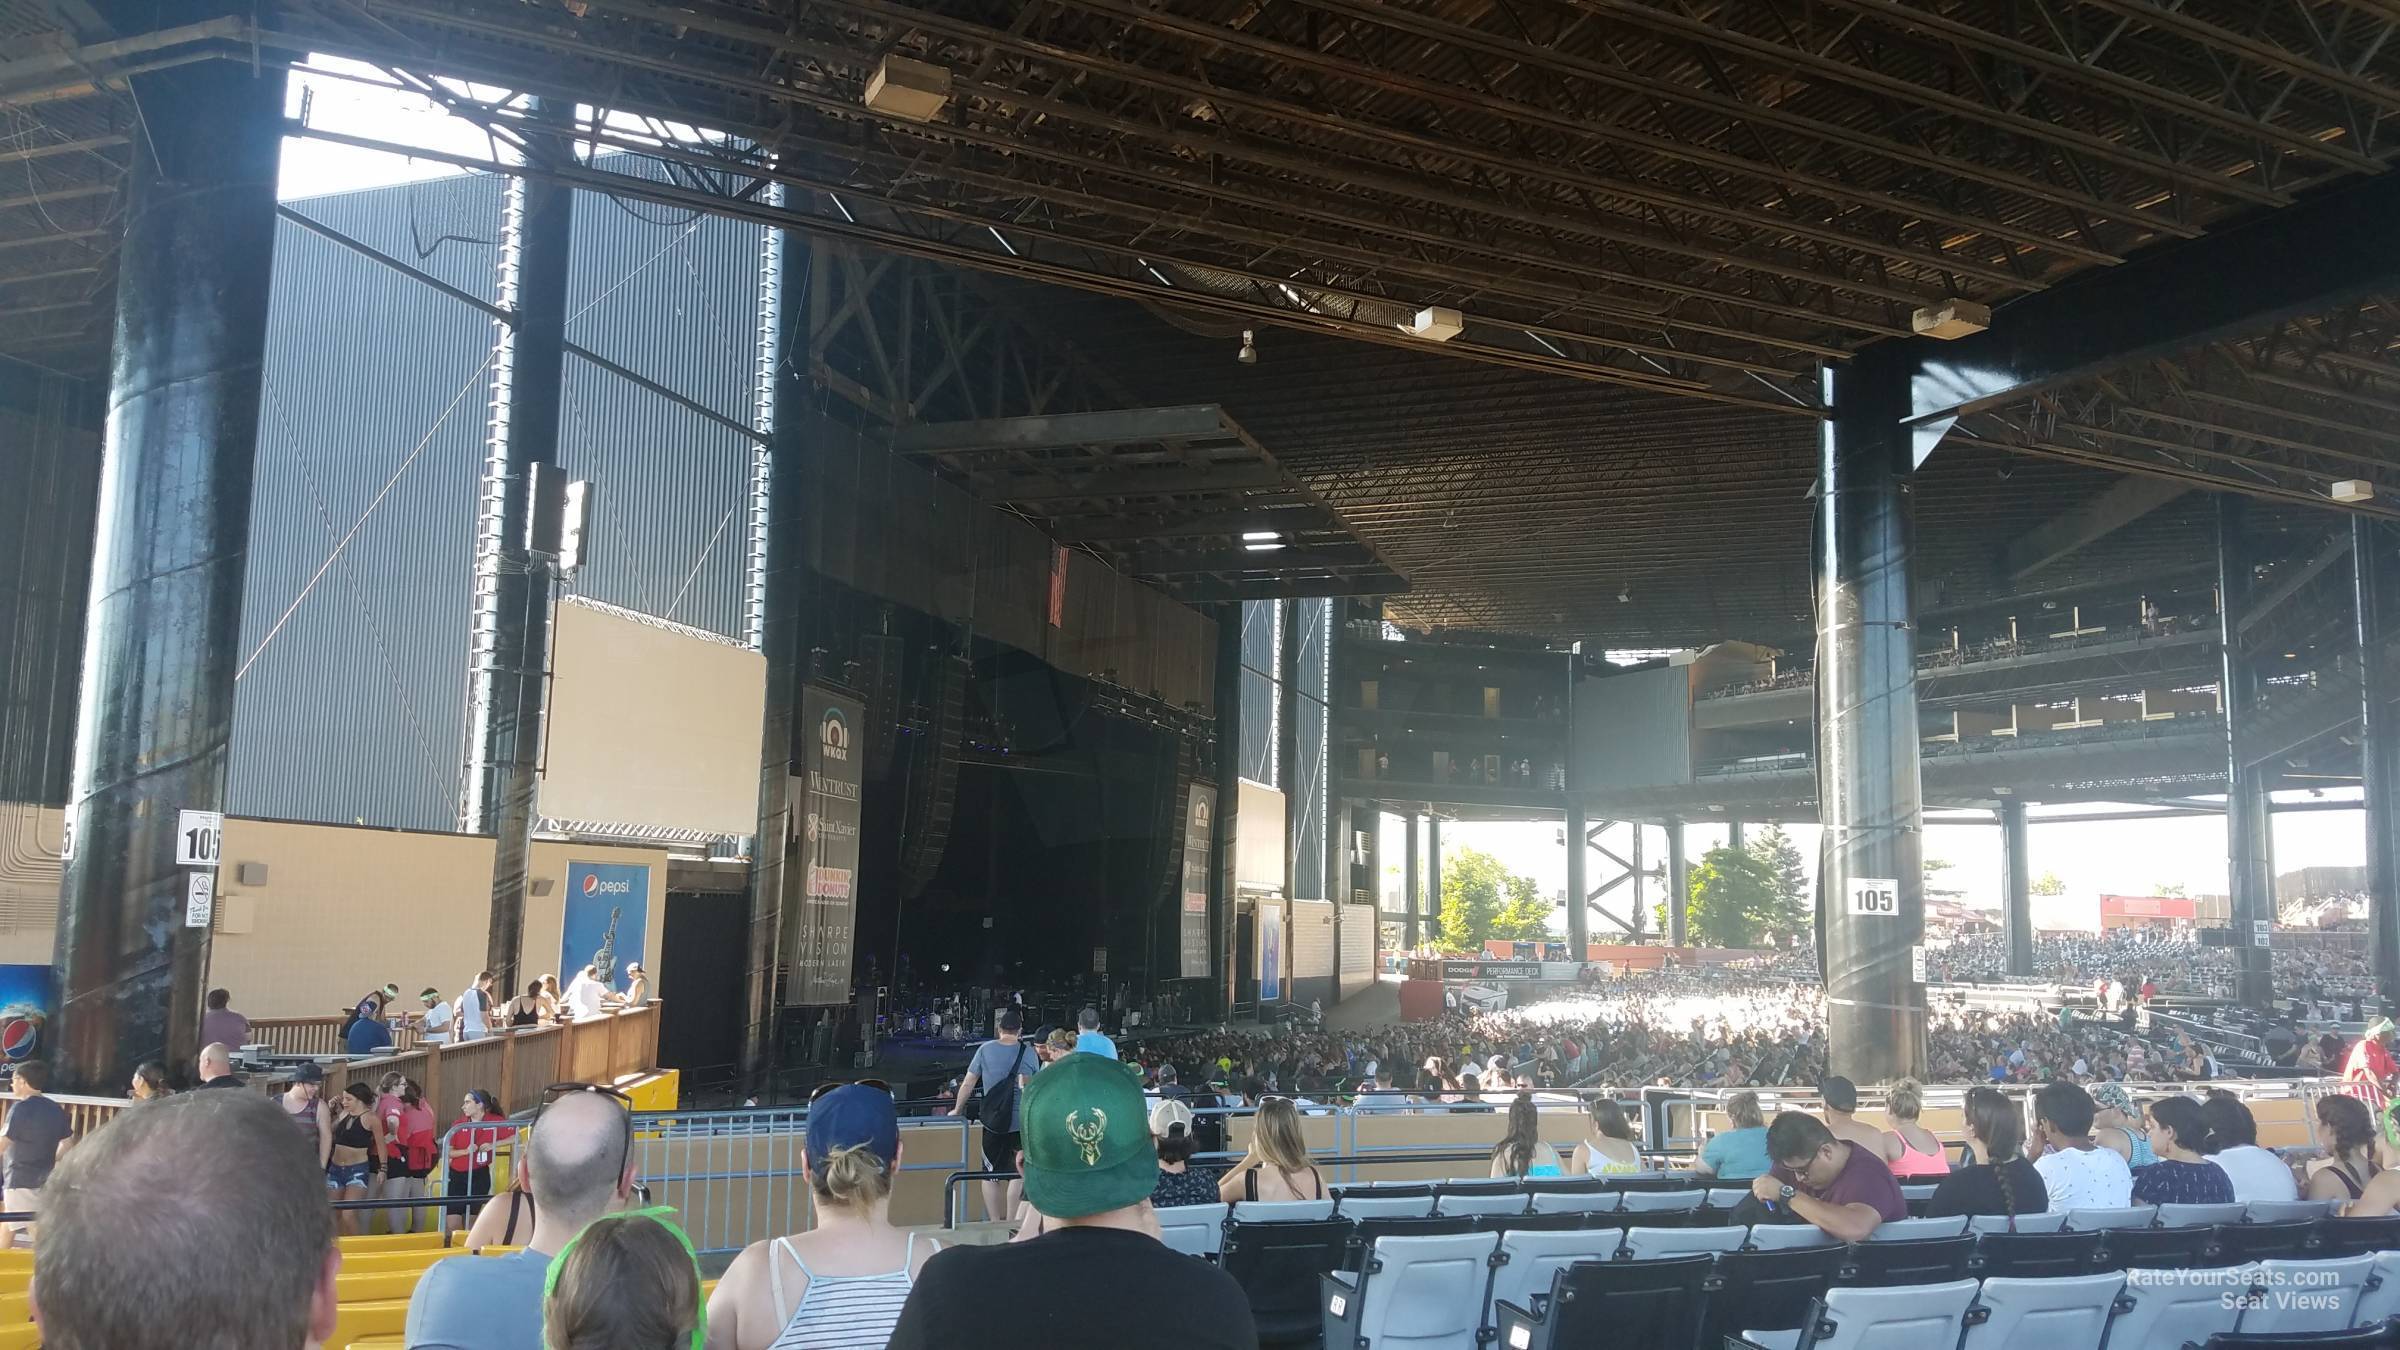 hollywood casino amphitheatre in tinley park il